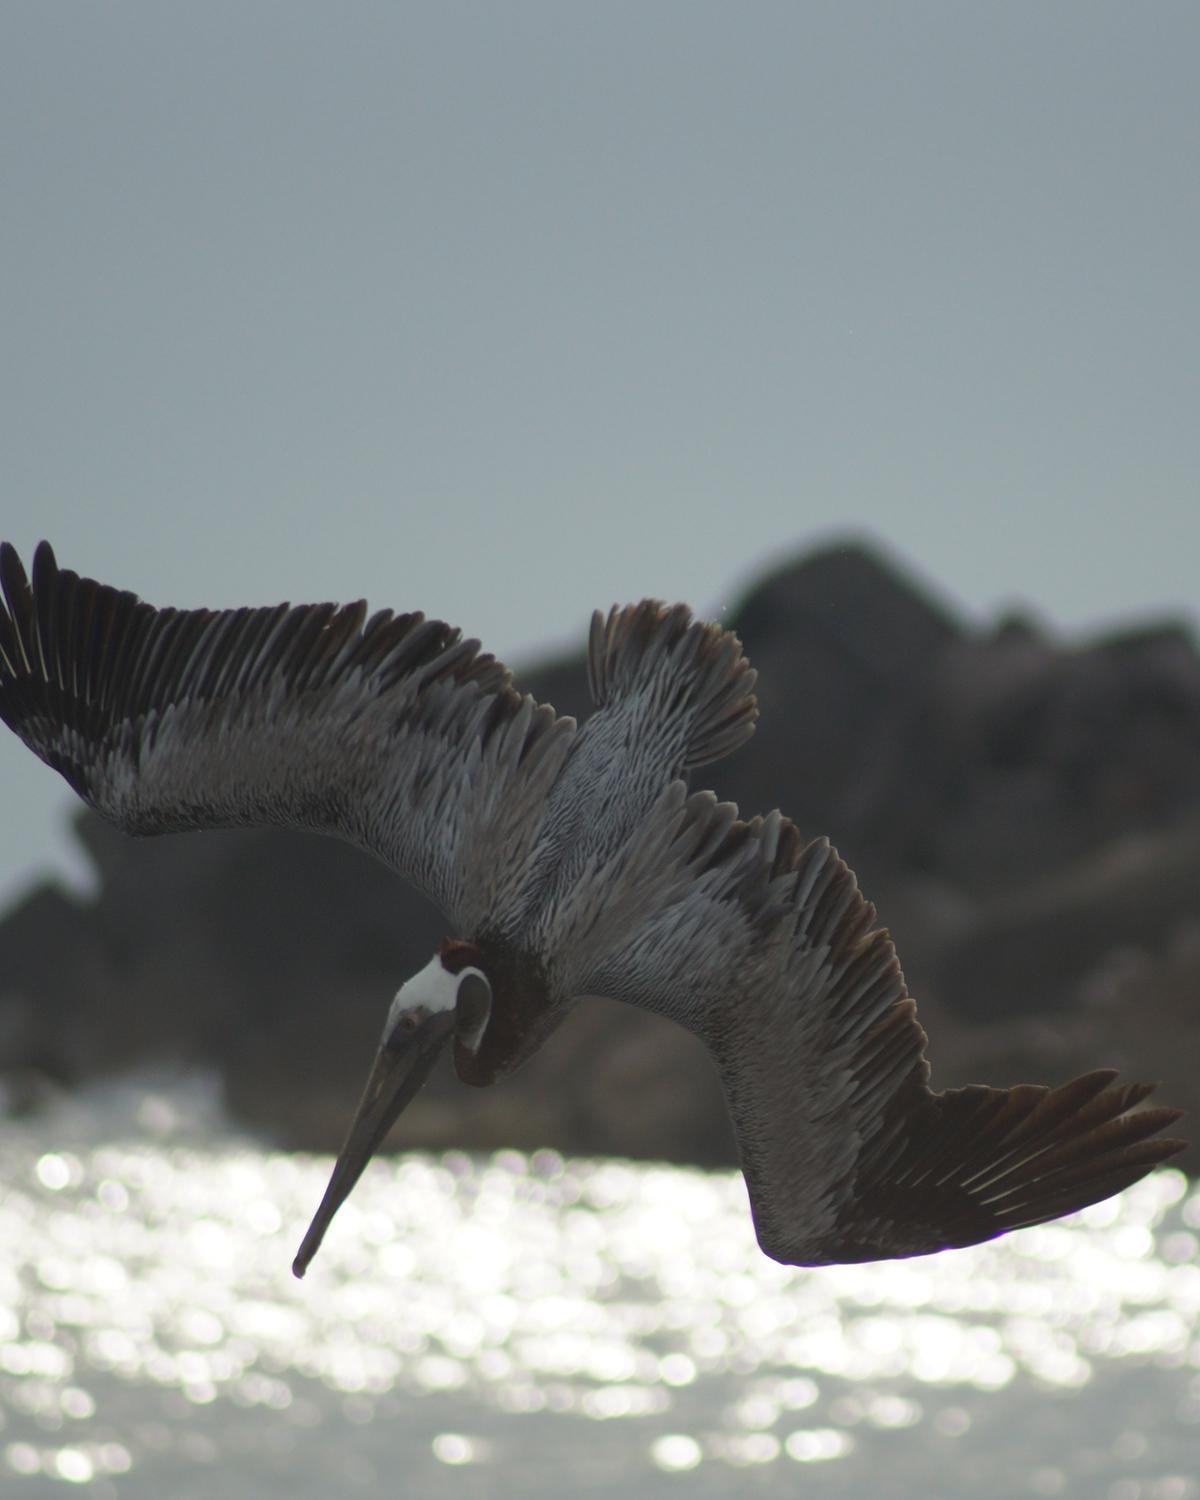 Brown Pelican Photo by Robin Oxley